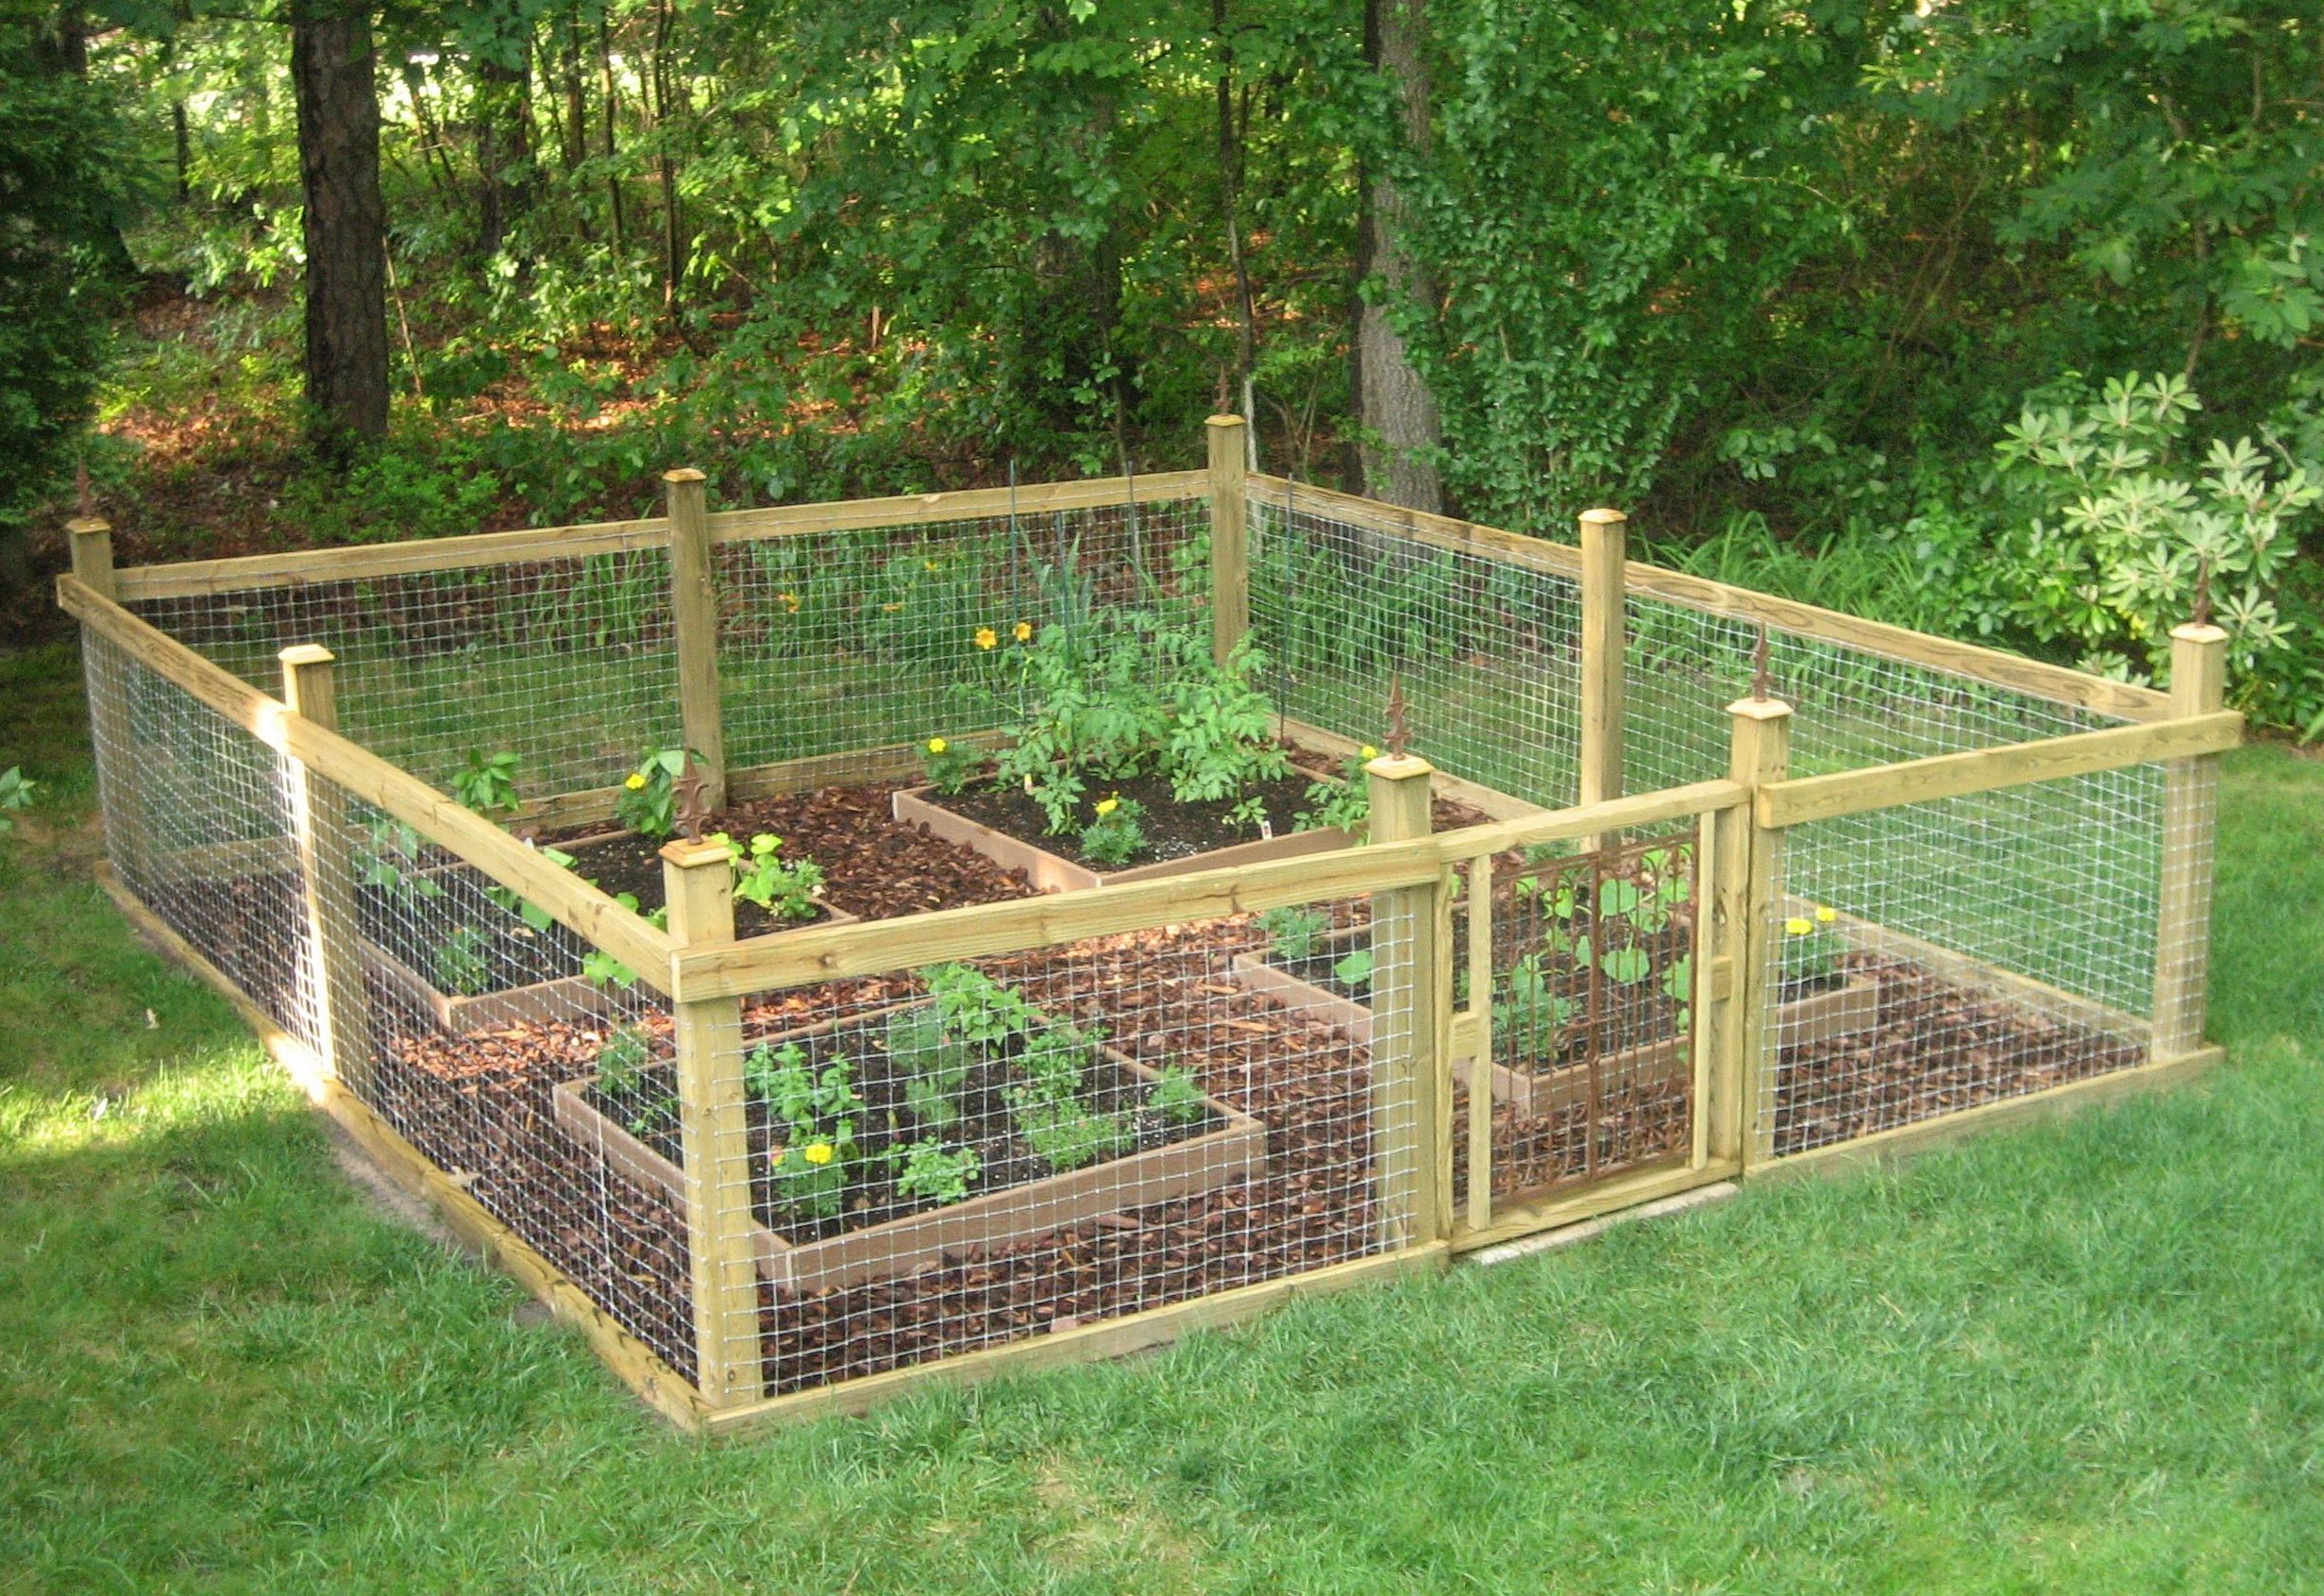 Fenced vegetable garden with wire mesh